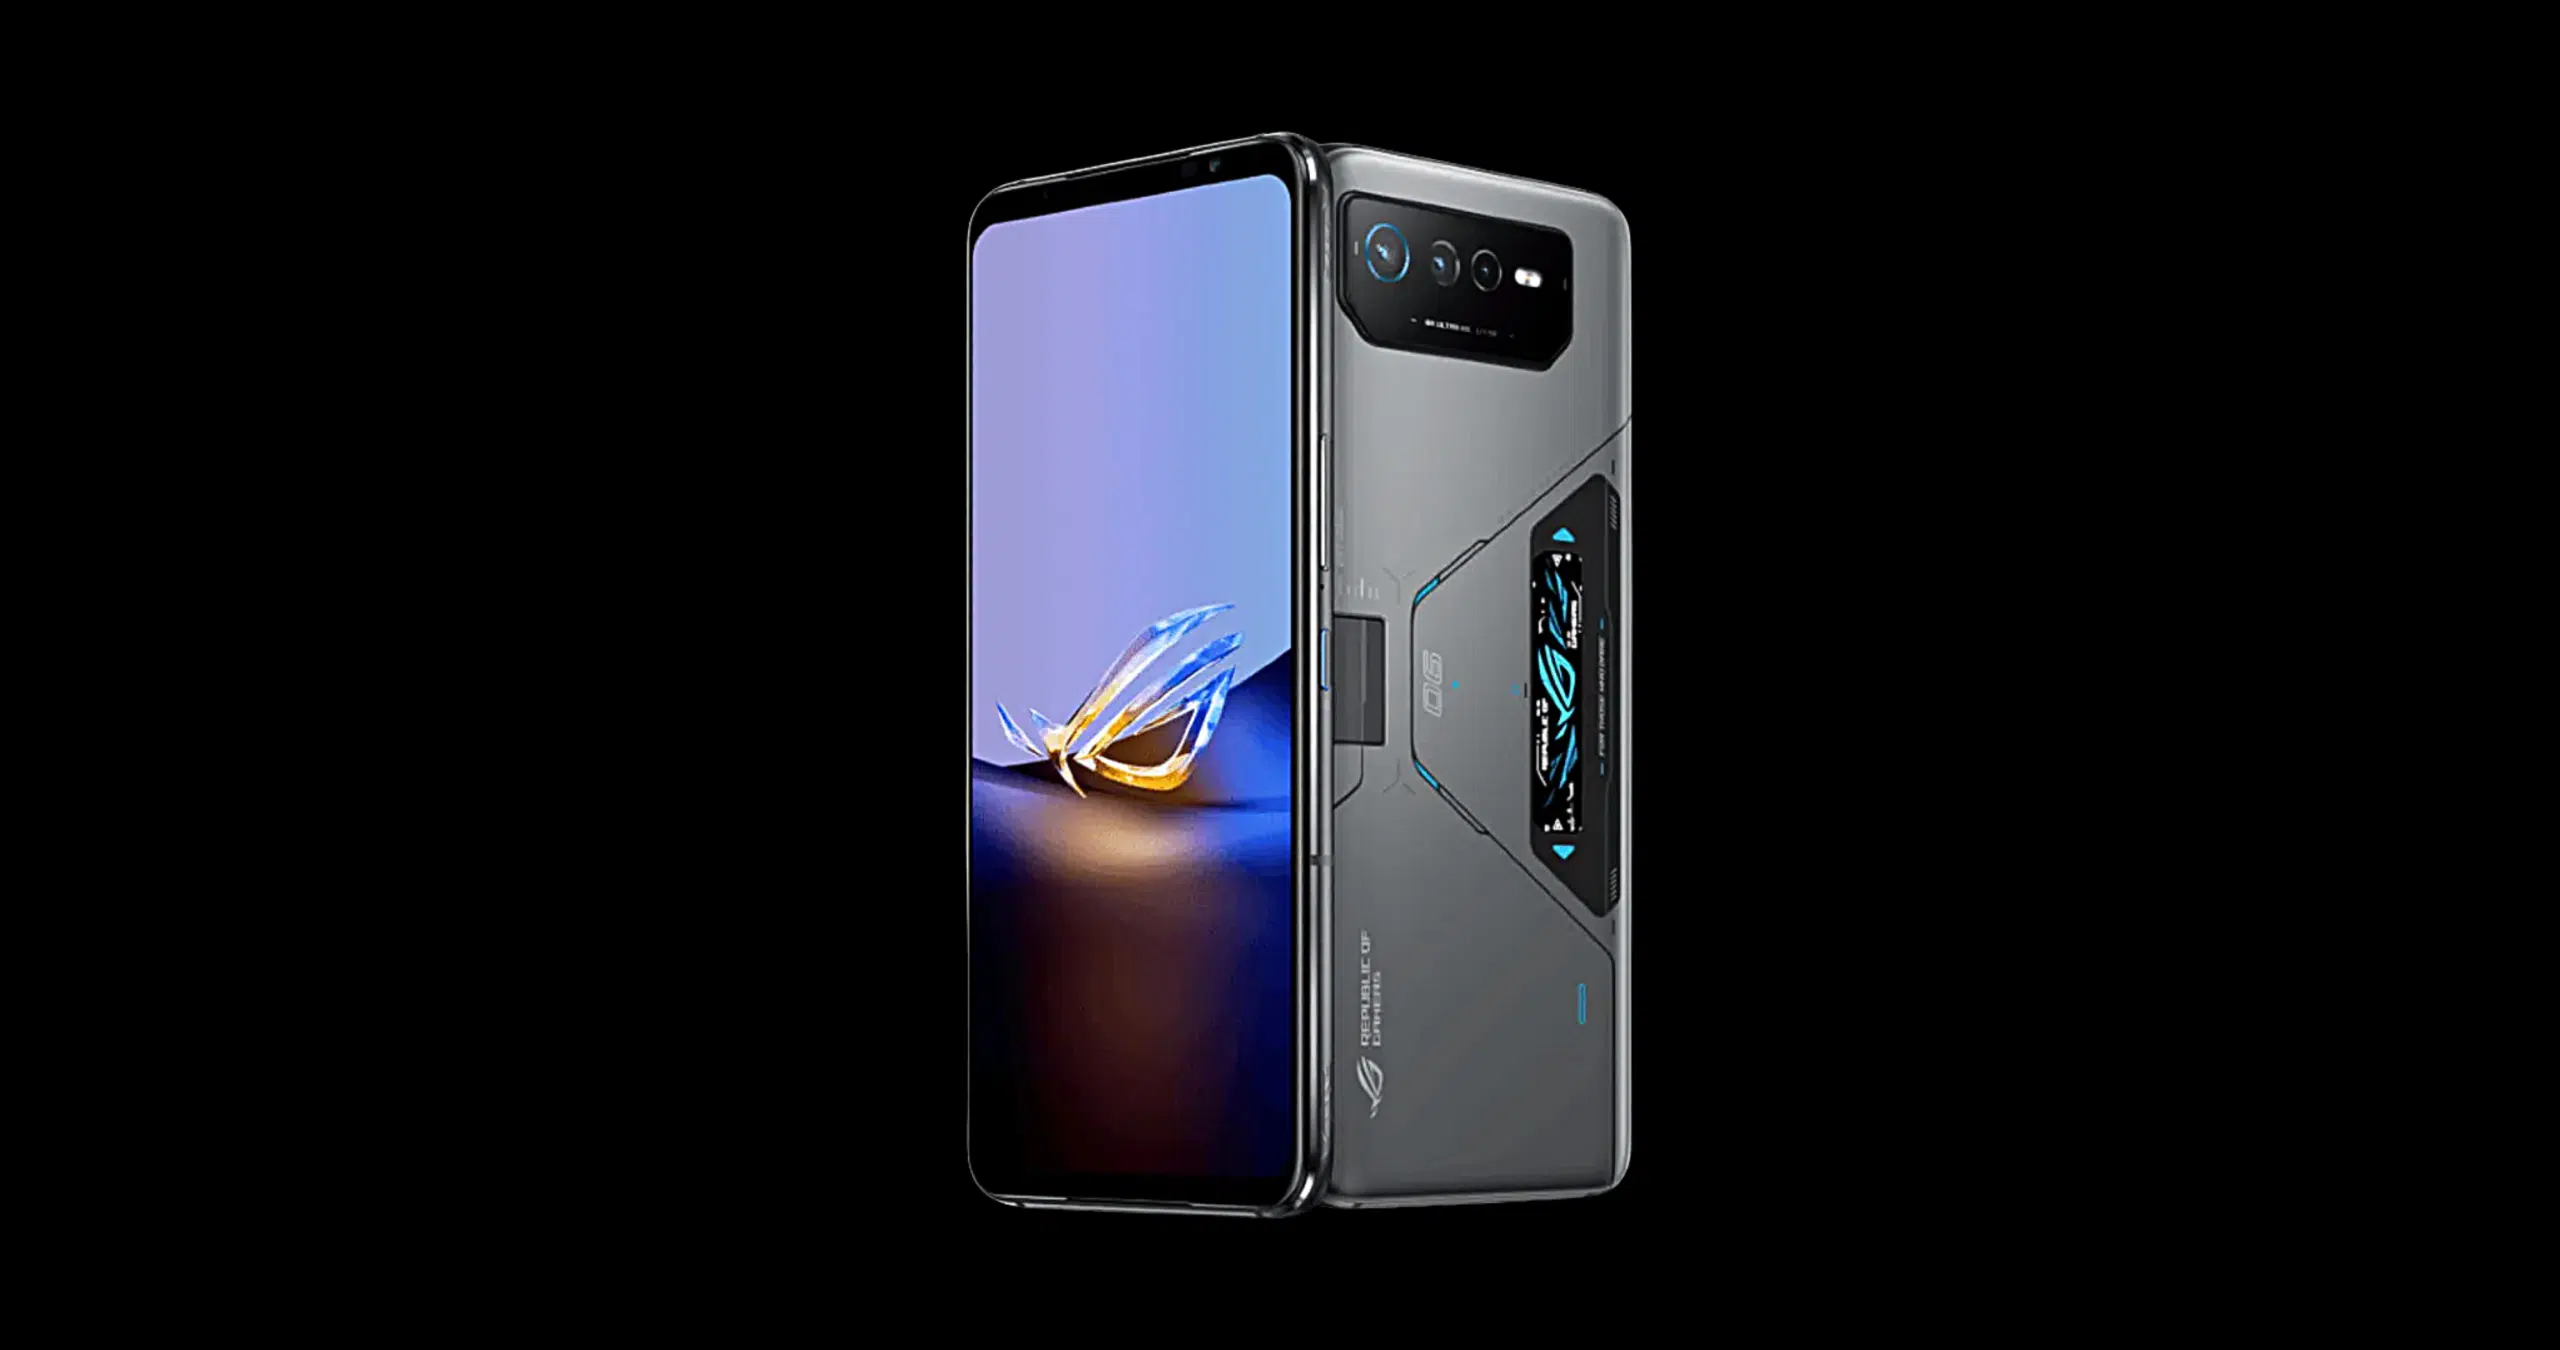 Asus ROG Phone 7 Global variant listed on TENNA: Expected launch soon